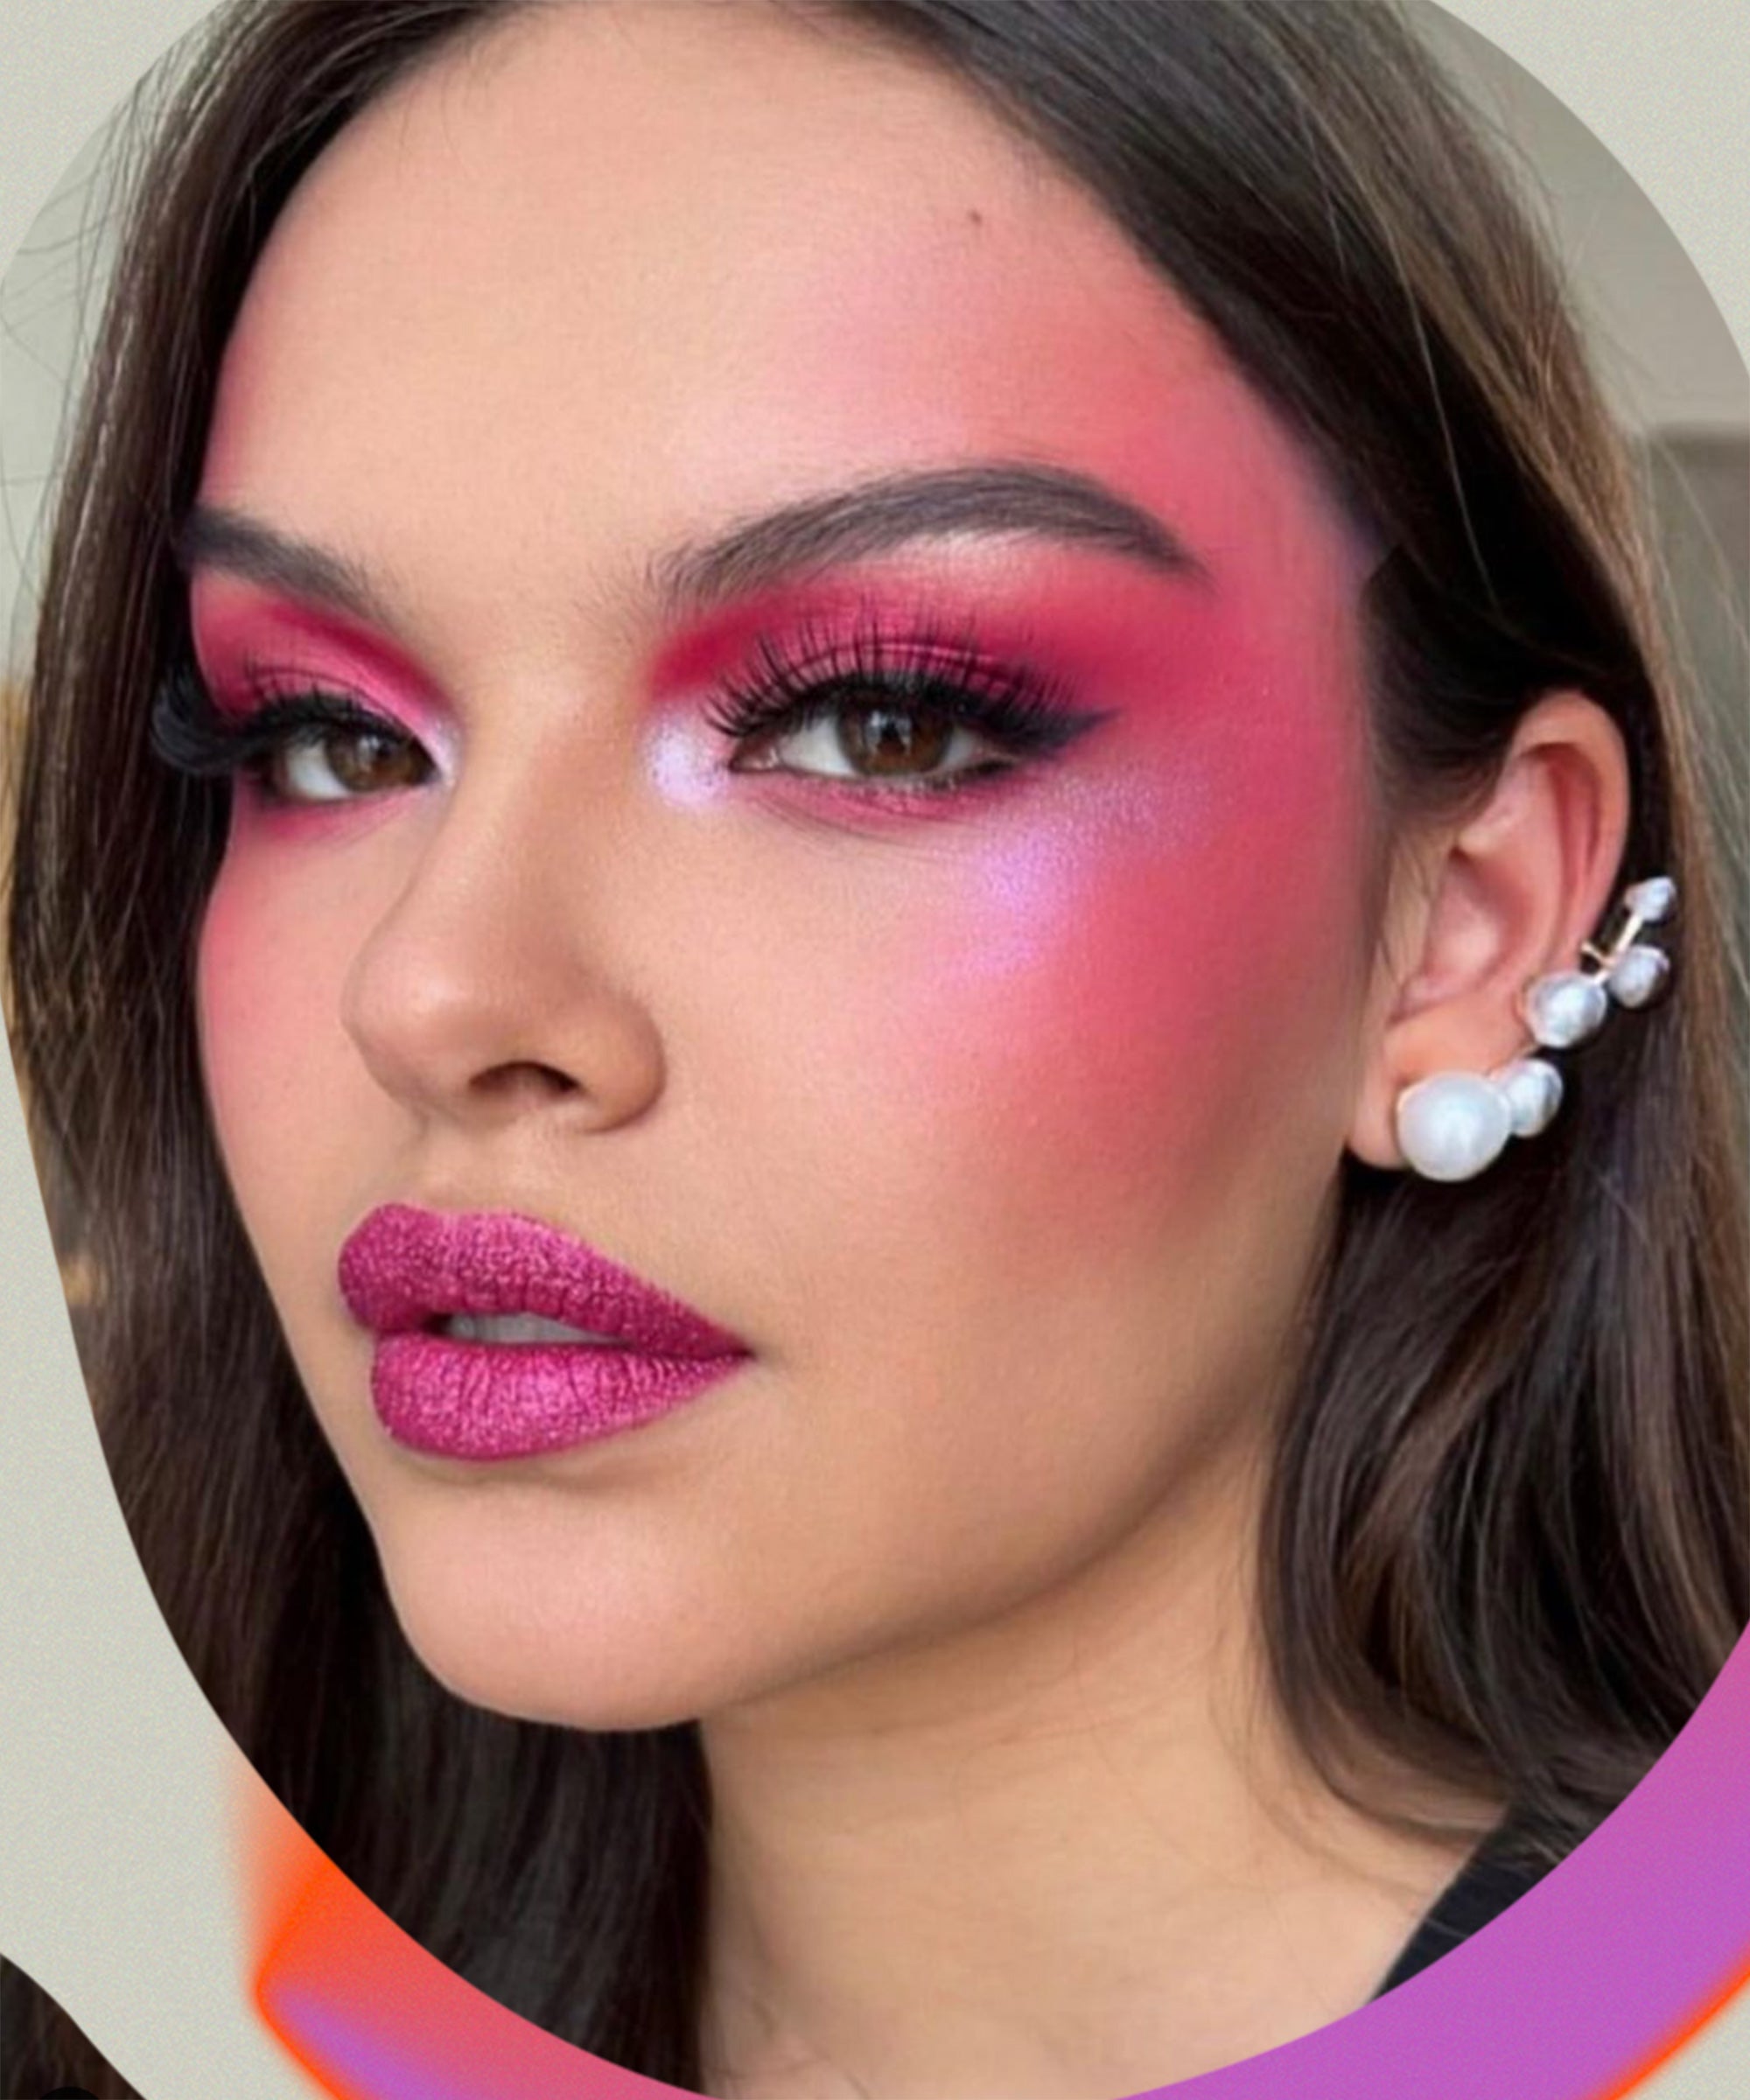 2023 Best Spring Makeup Trends, According to Experts